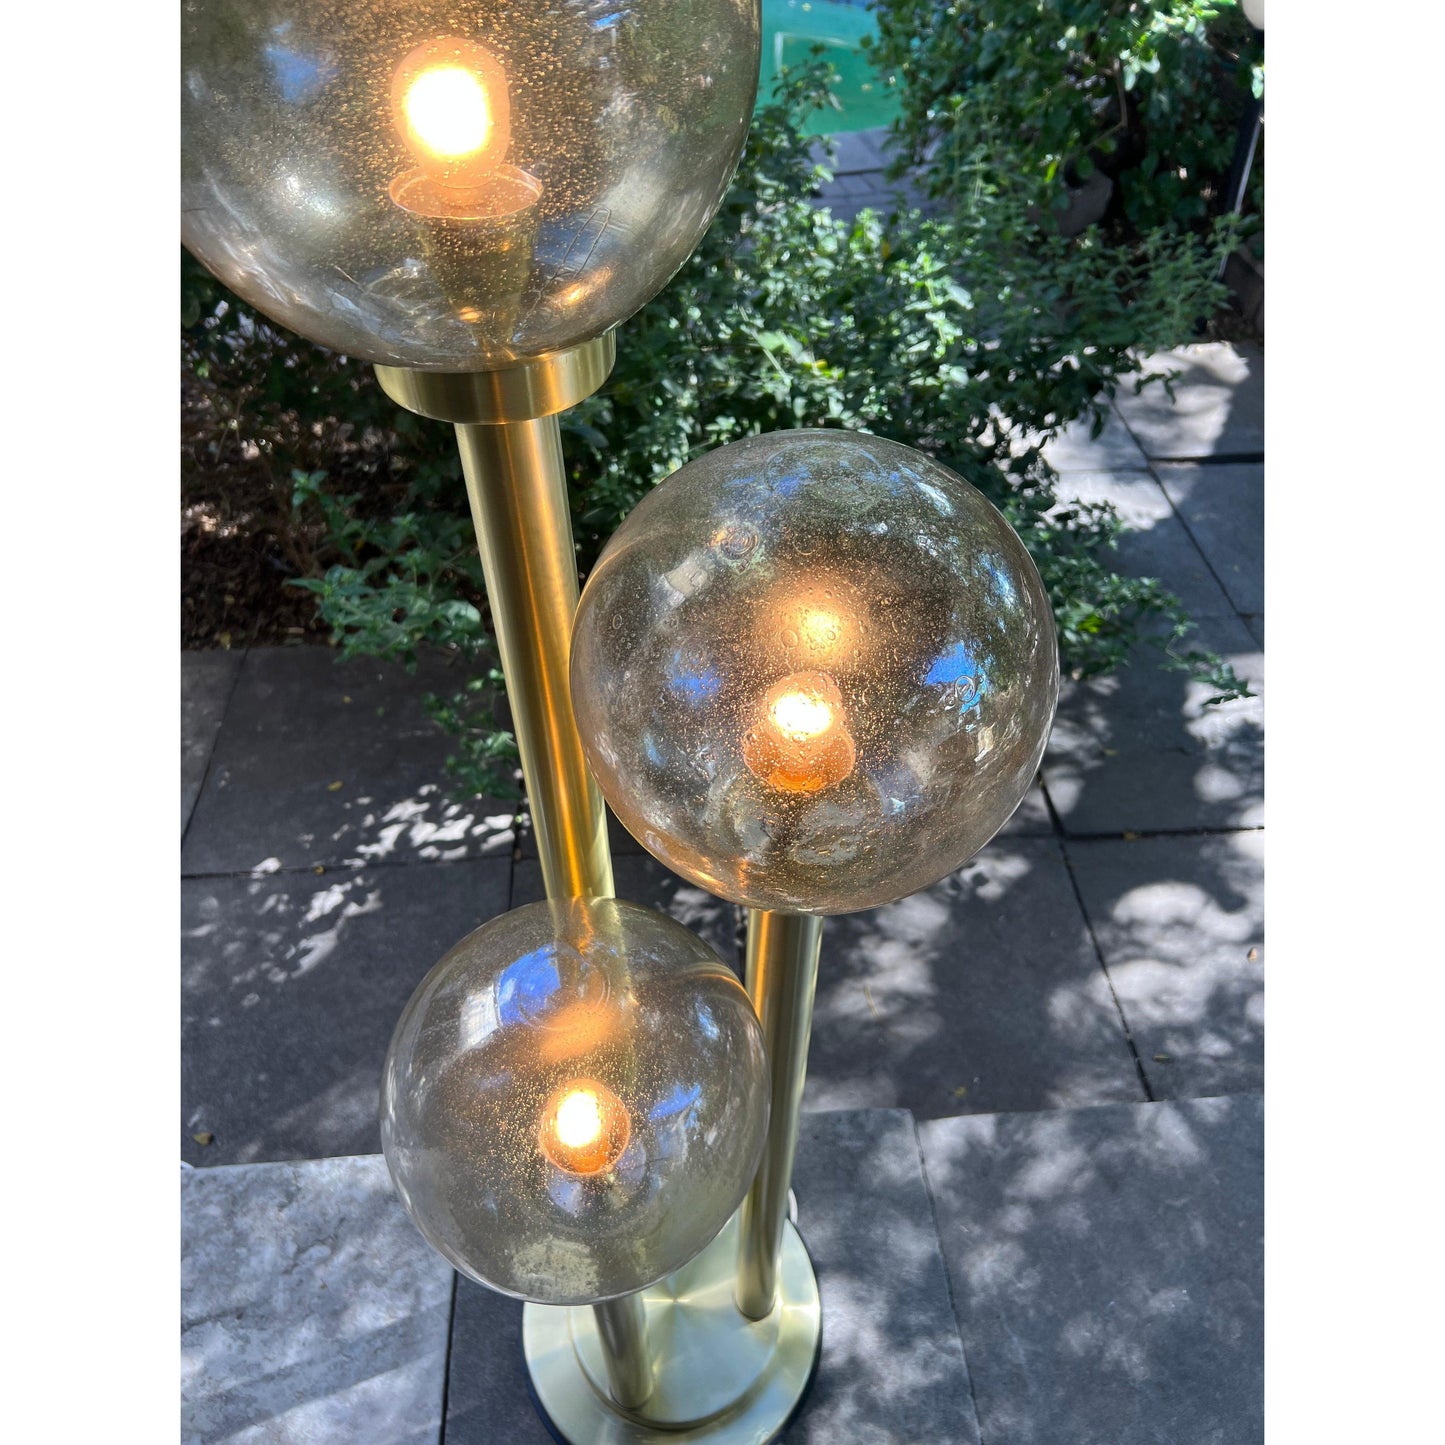 Vintage Standing Lamp - 3 Tiered - Hand blown Glass Ball Shades - Gold